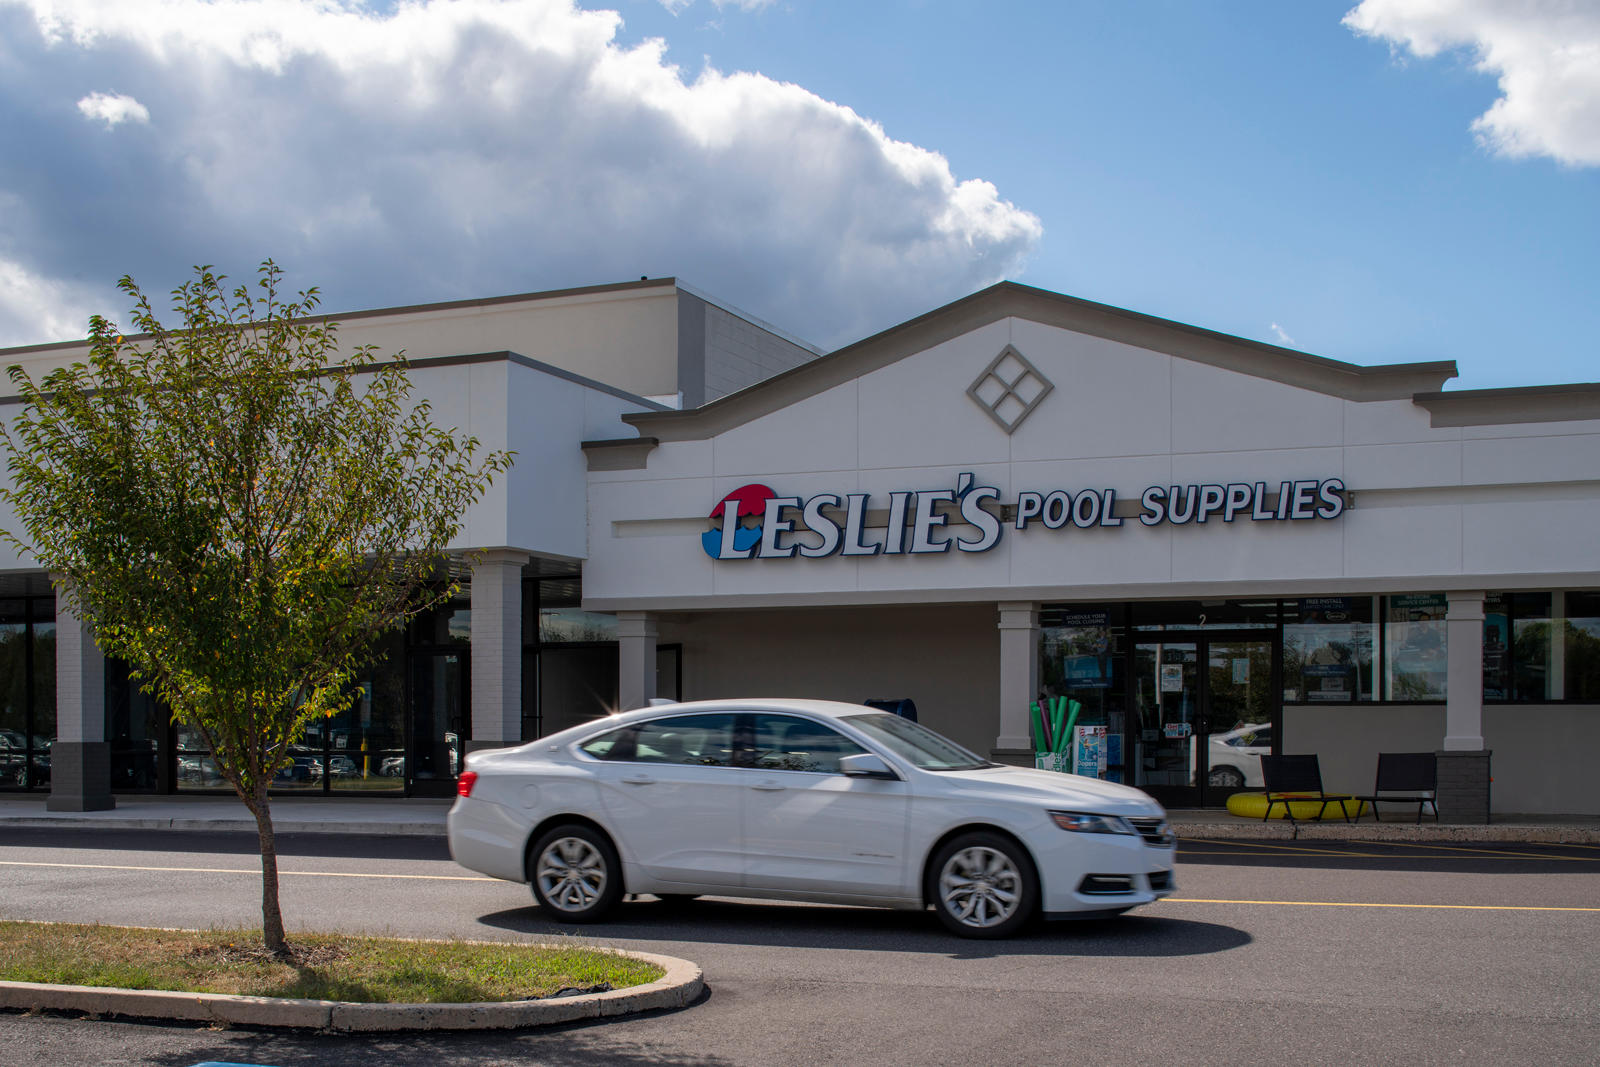 Leslie's Pool Supplies at Collegeville Shopping Center